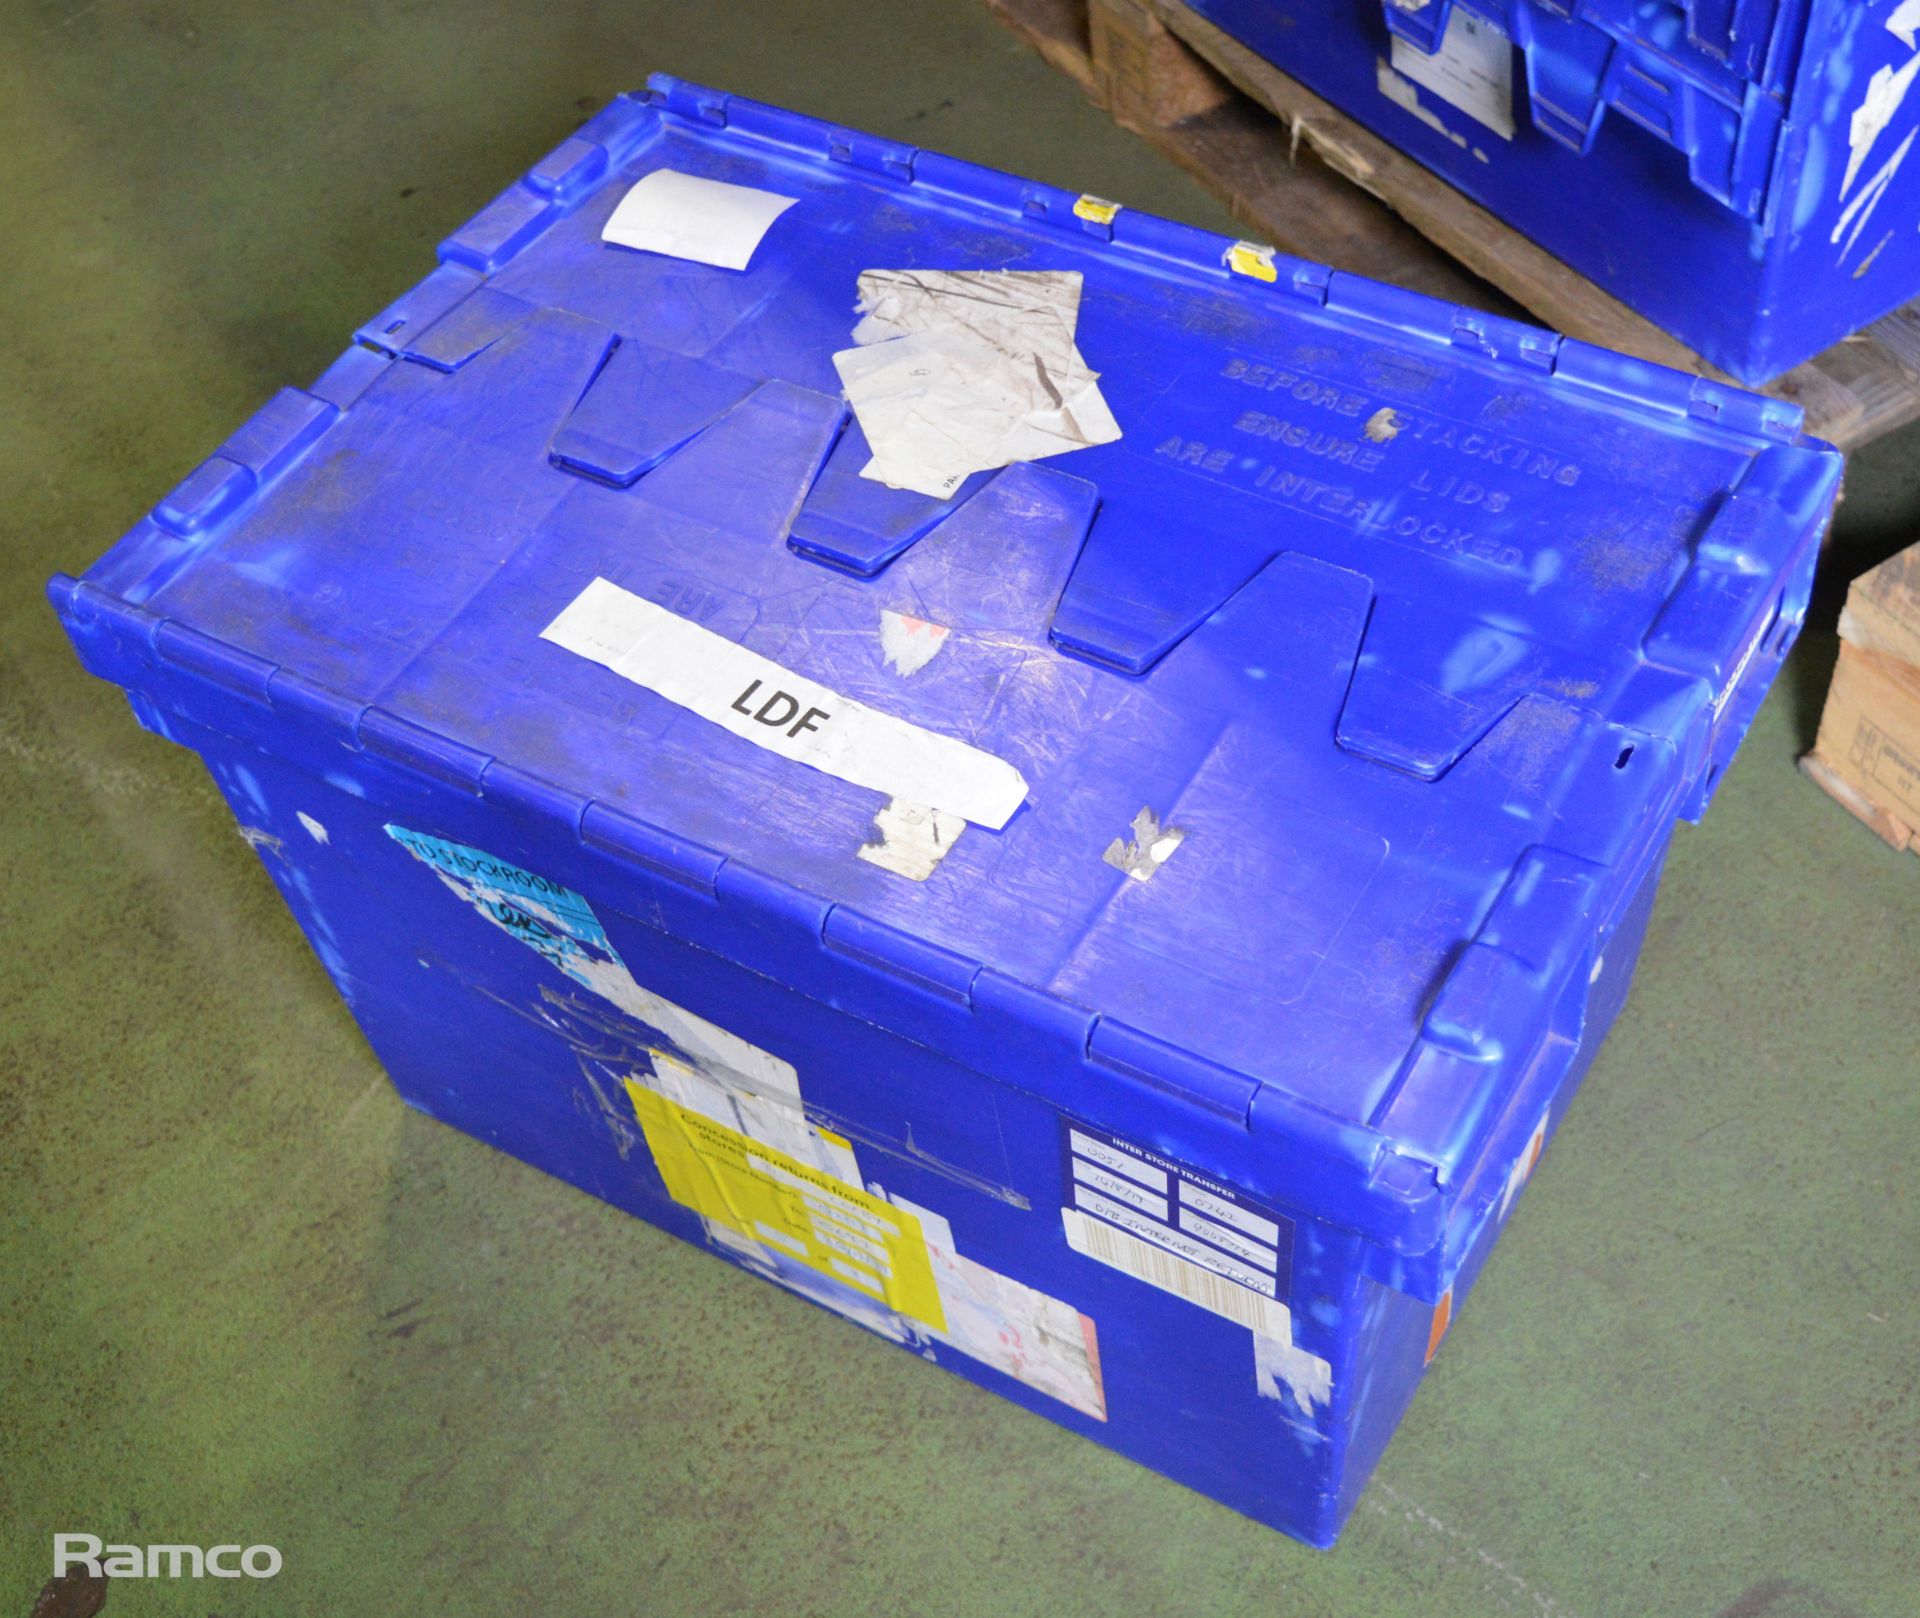 60x Plastic Tote Boxes With Attached Lid L 600mm x W 400mm x H 350mm - Image 2 of 3